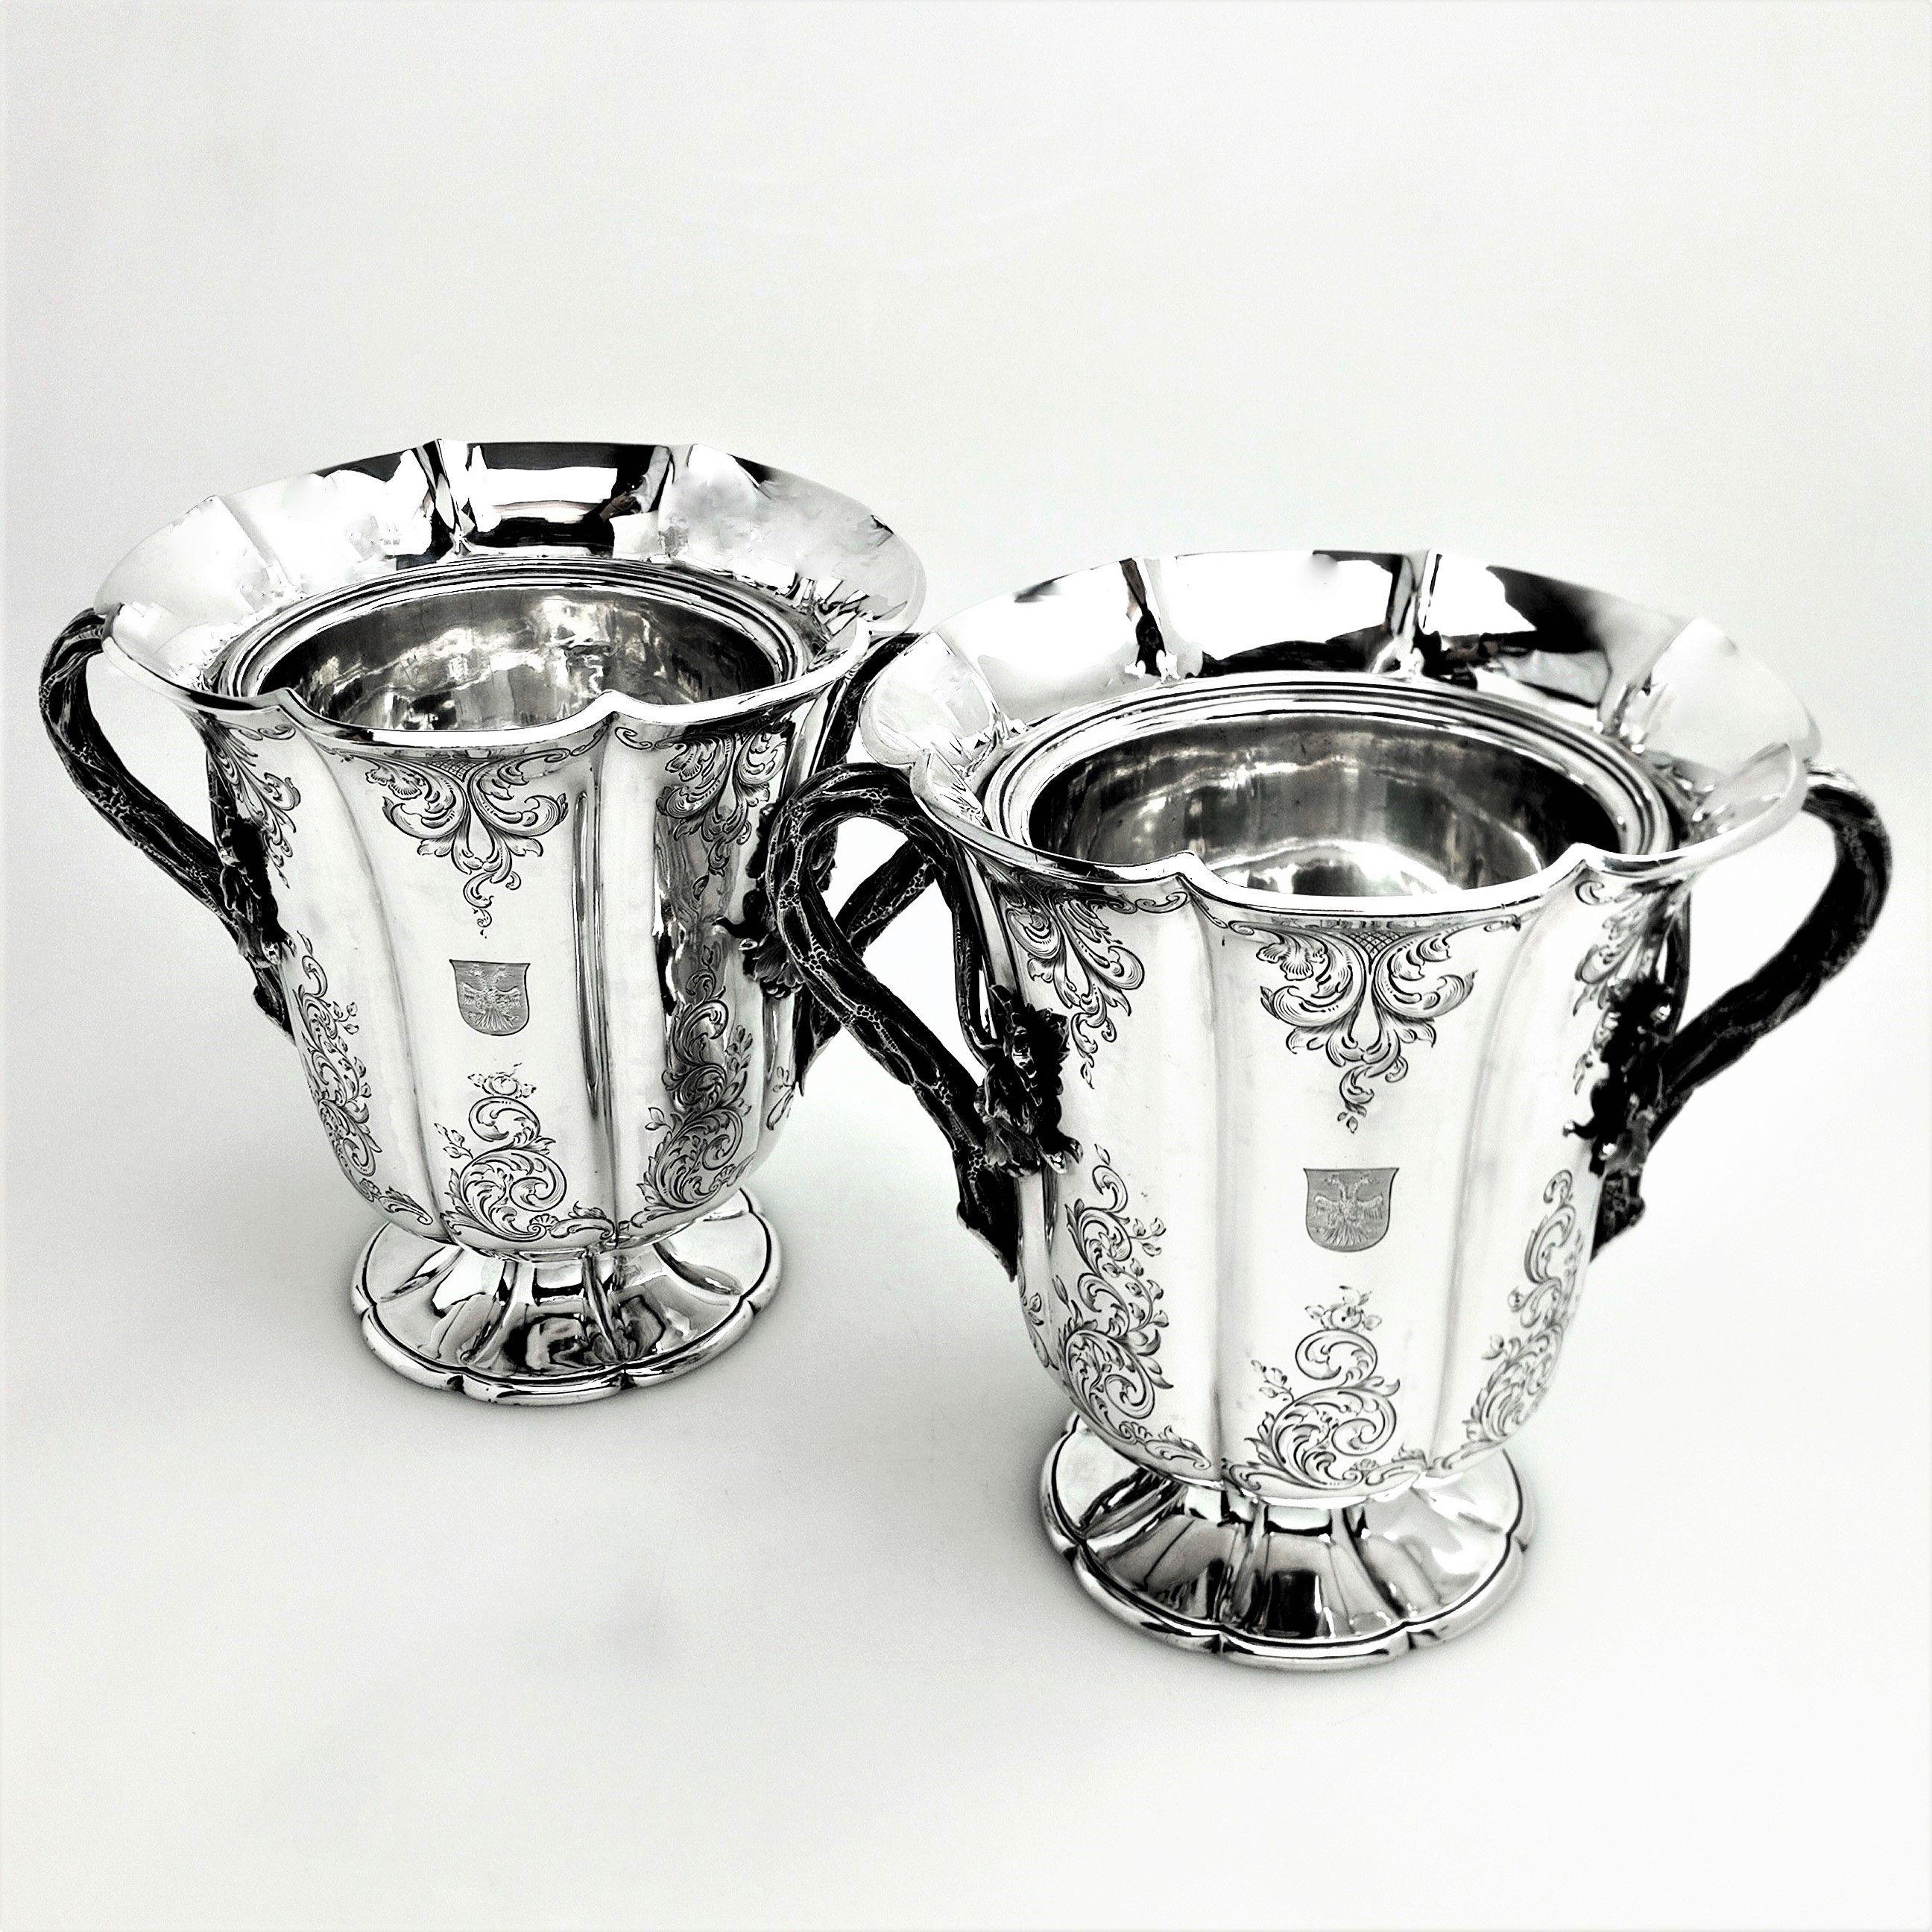 English Pair of Antique Victorian Sterling Silver Wine Coolers / Champagne Buckets, 1844